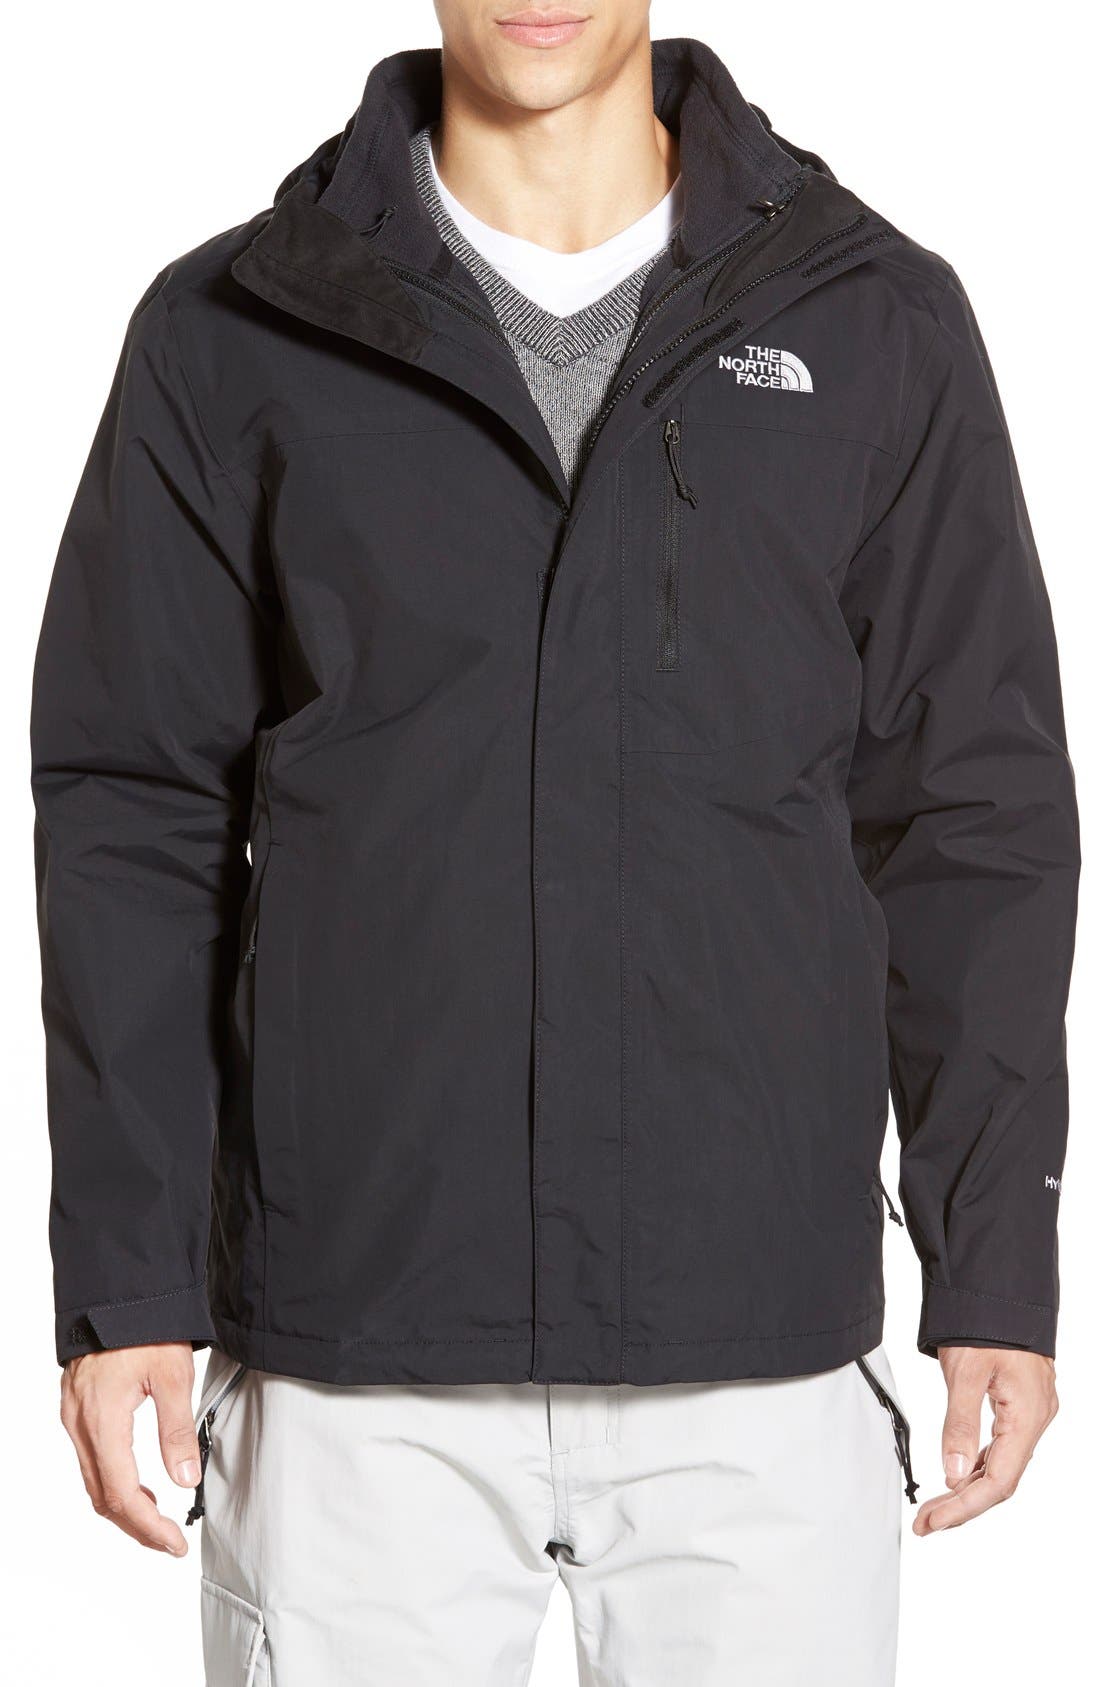 north face atlas triclimate